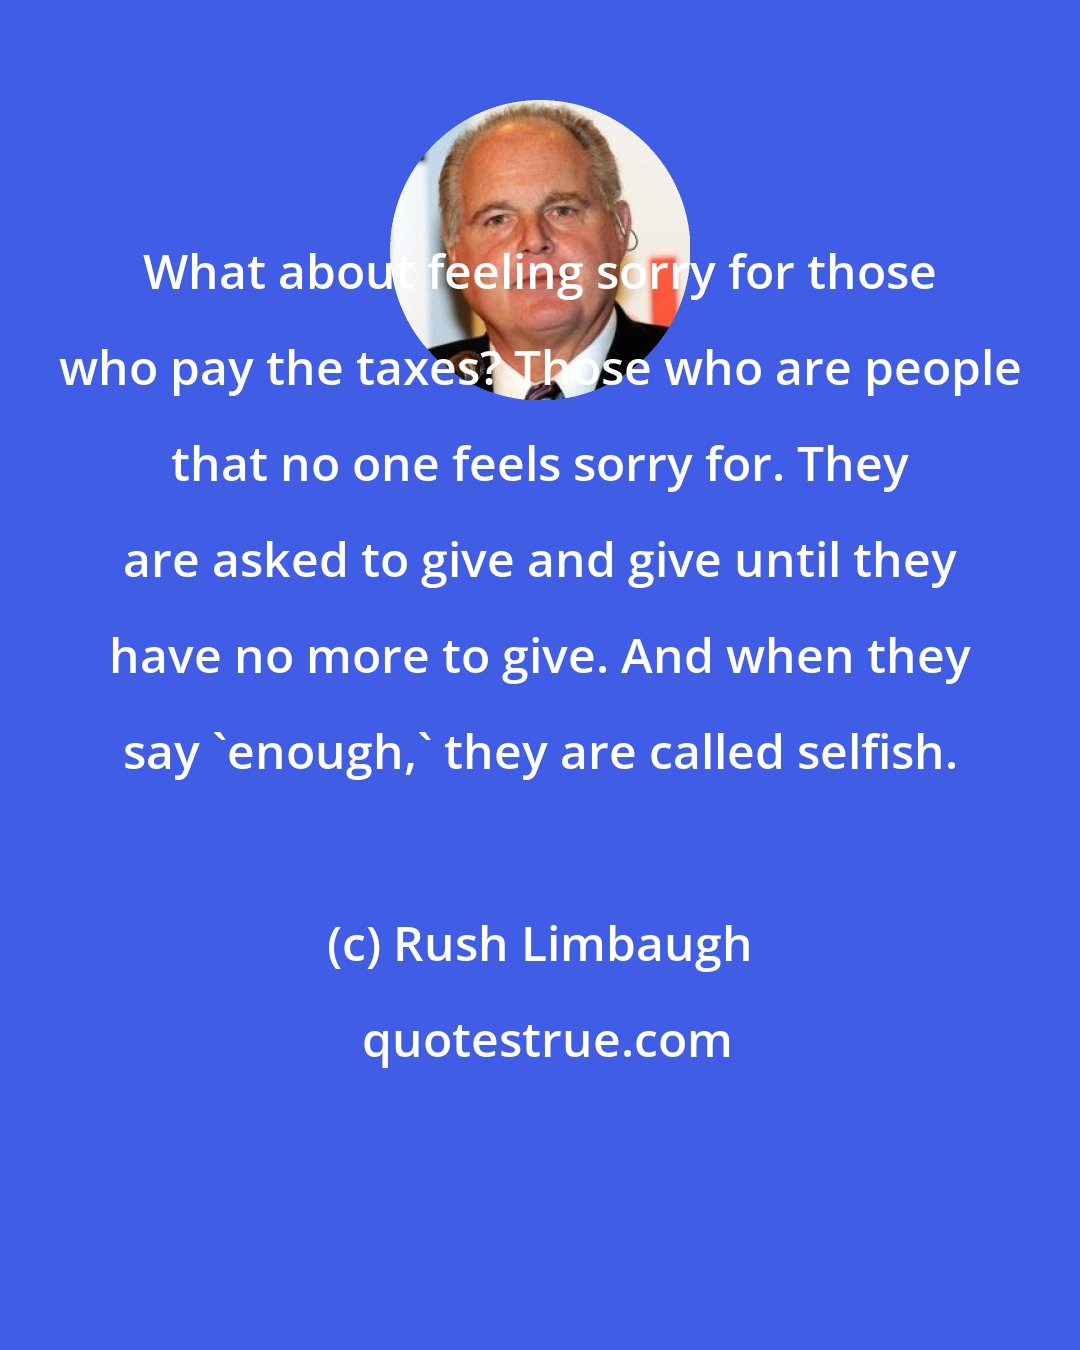 Rush Limbaugh: What about feeling sorry for those who pay the taxes? Those who are people that no one feels sorry for. They are asked to give and give until they have no more to give. And when they say 'enough,' they are called selfish.